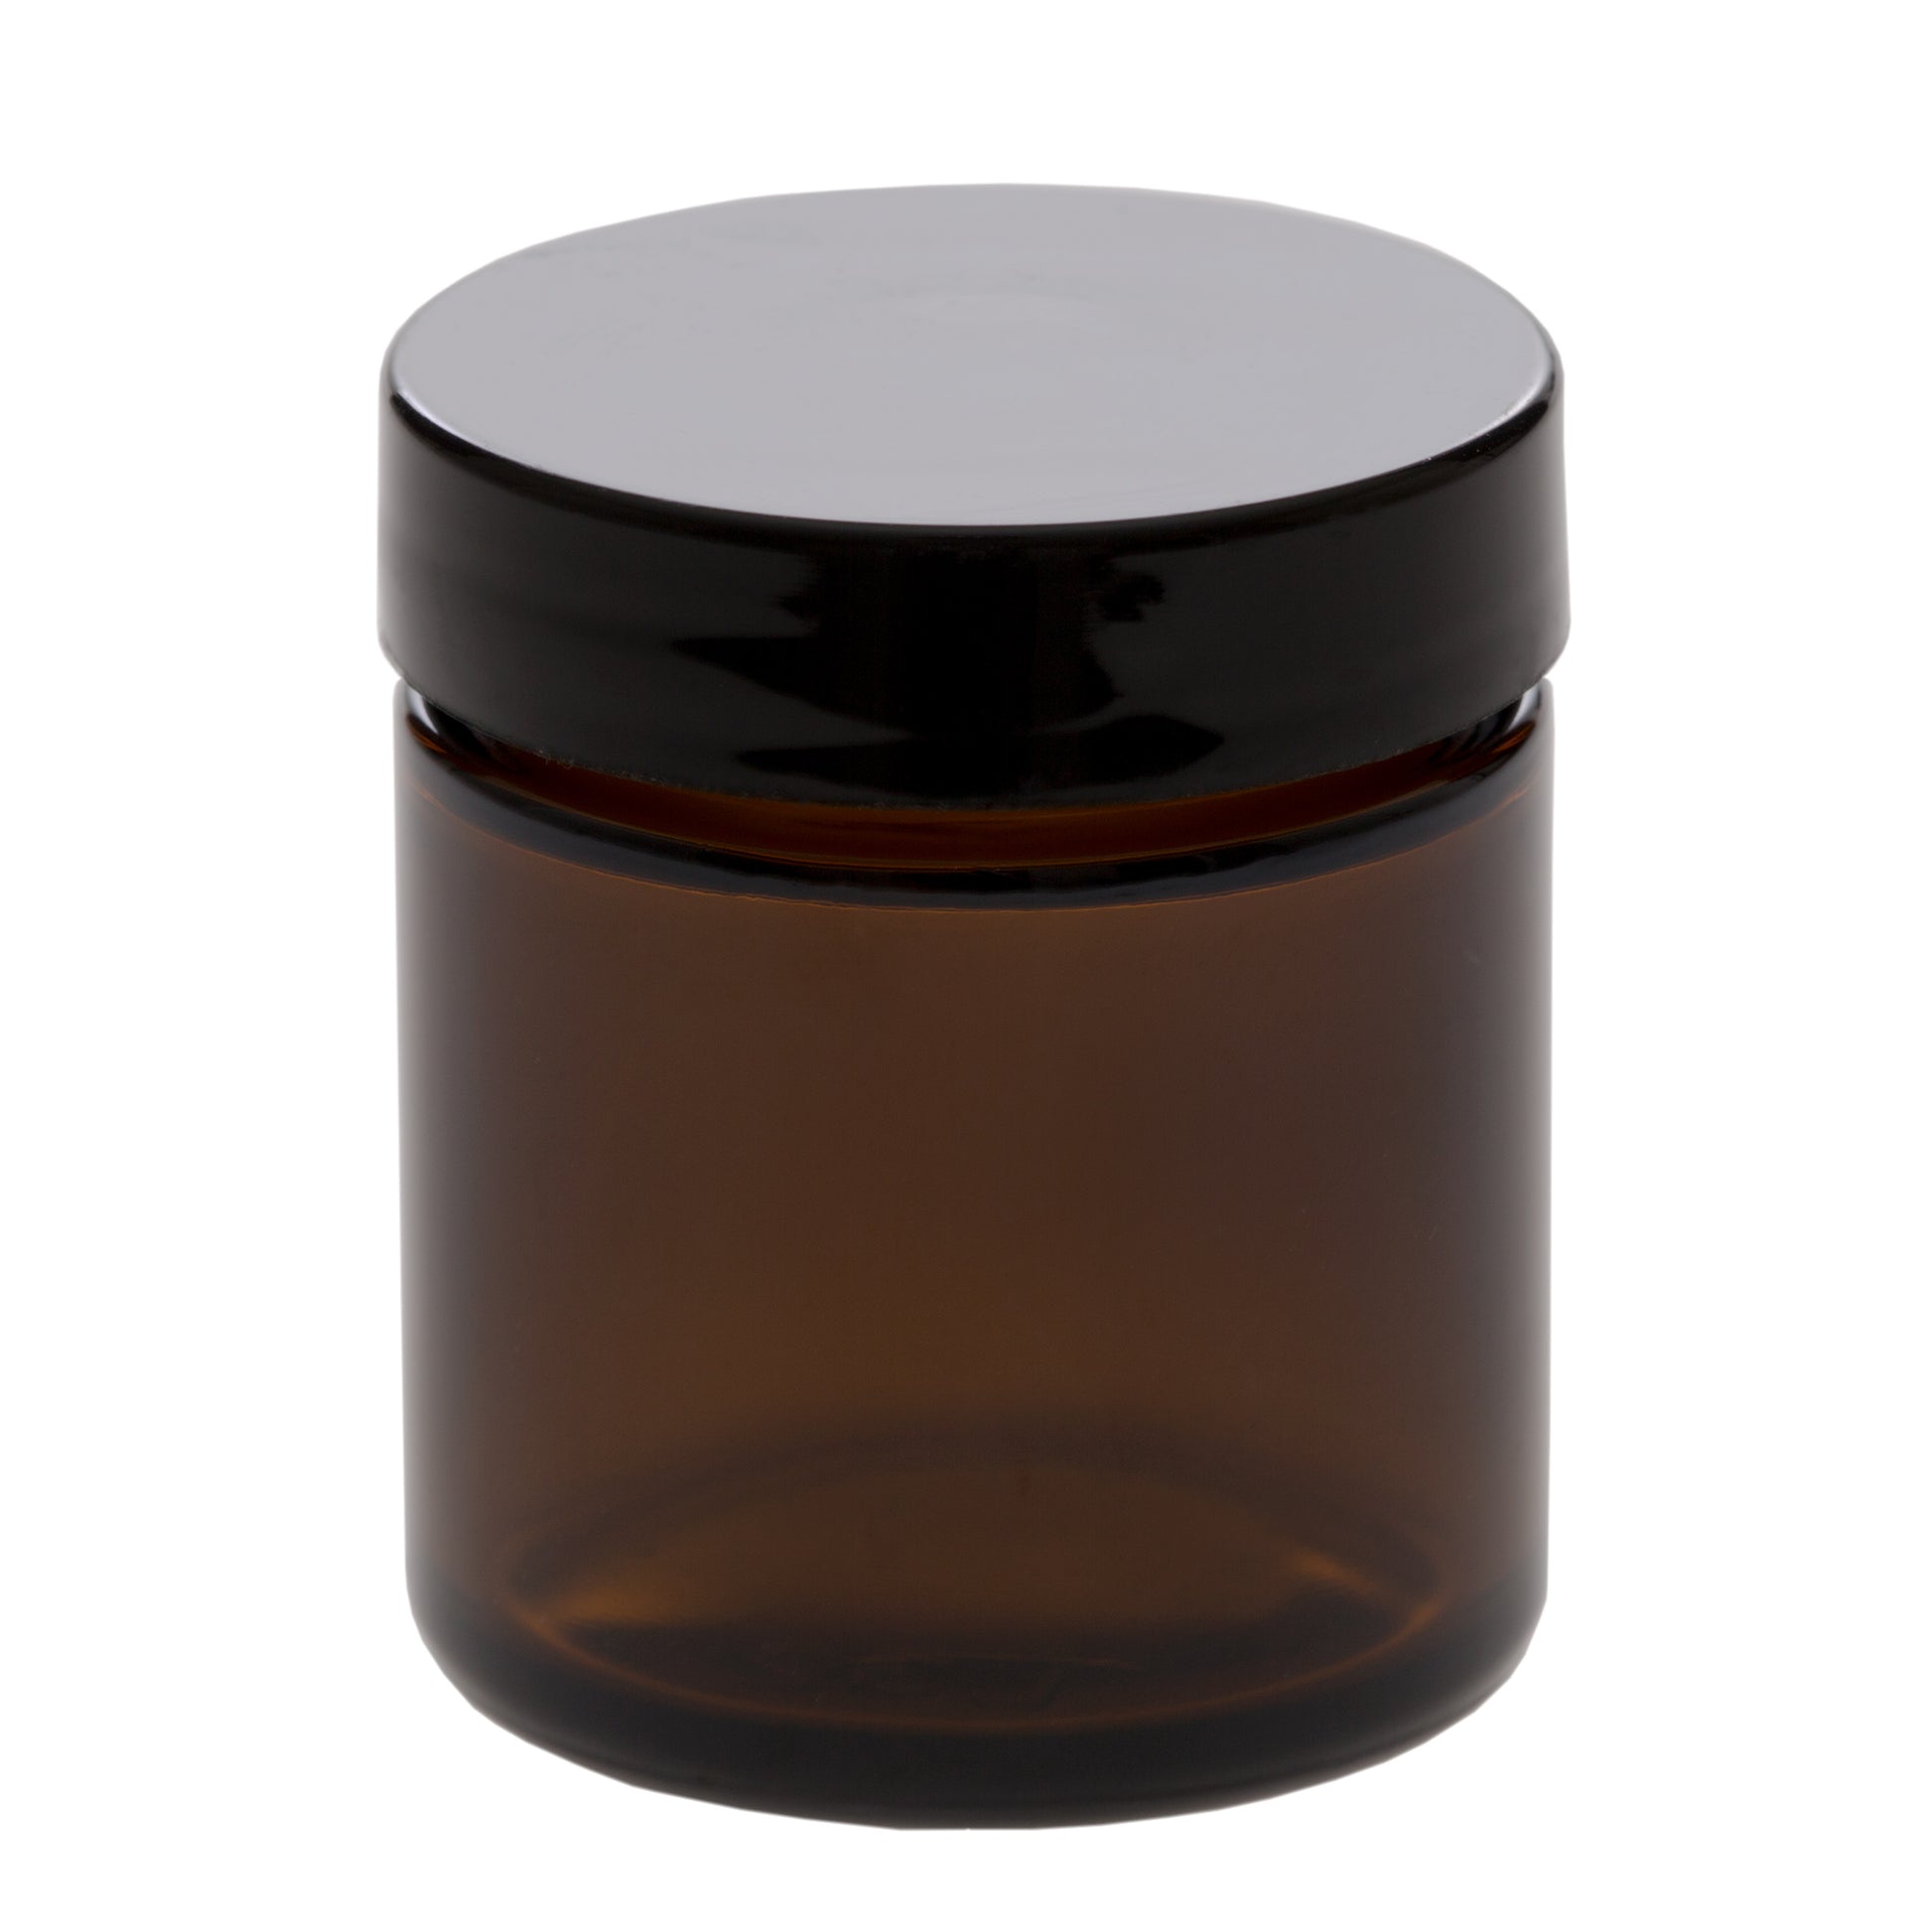 50 ml Amber Glass Jar with 45-400 Black Gloss Smooth Cap